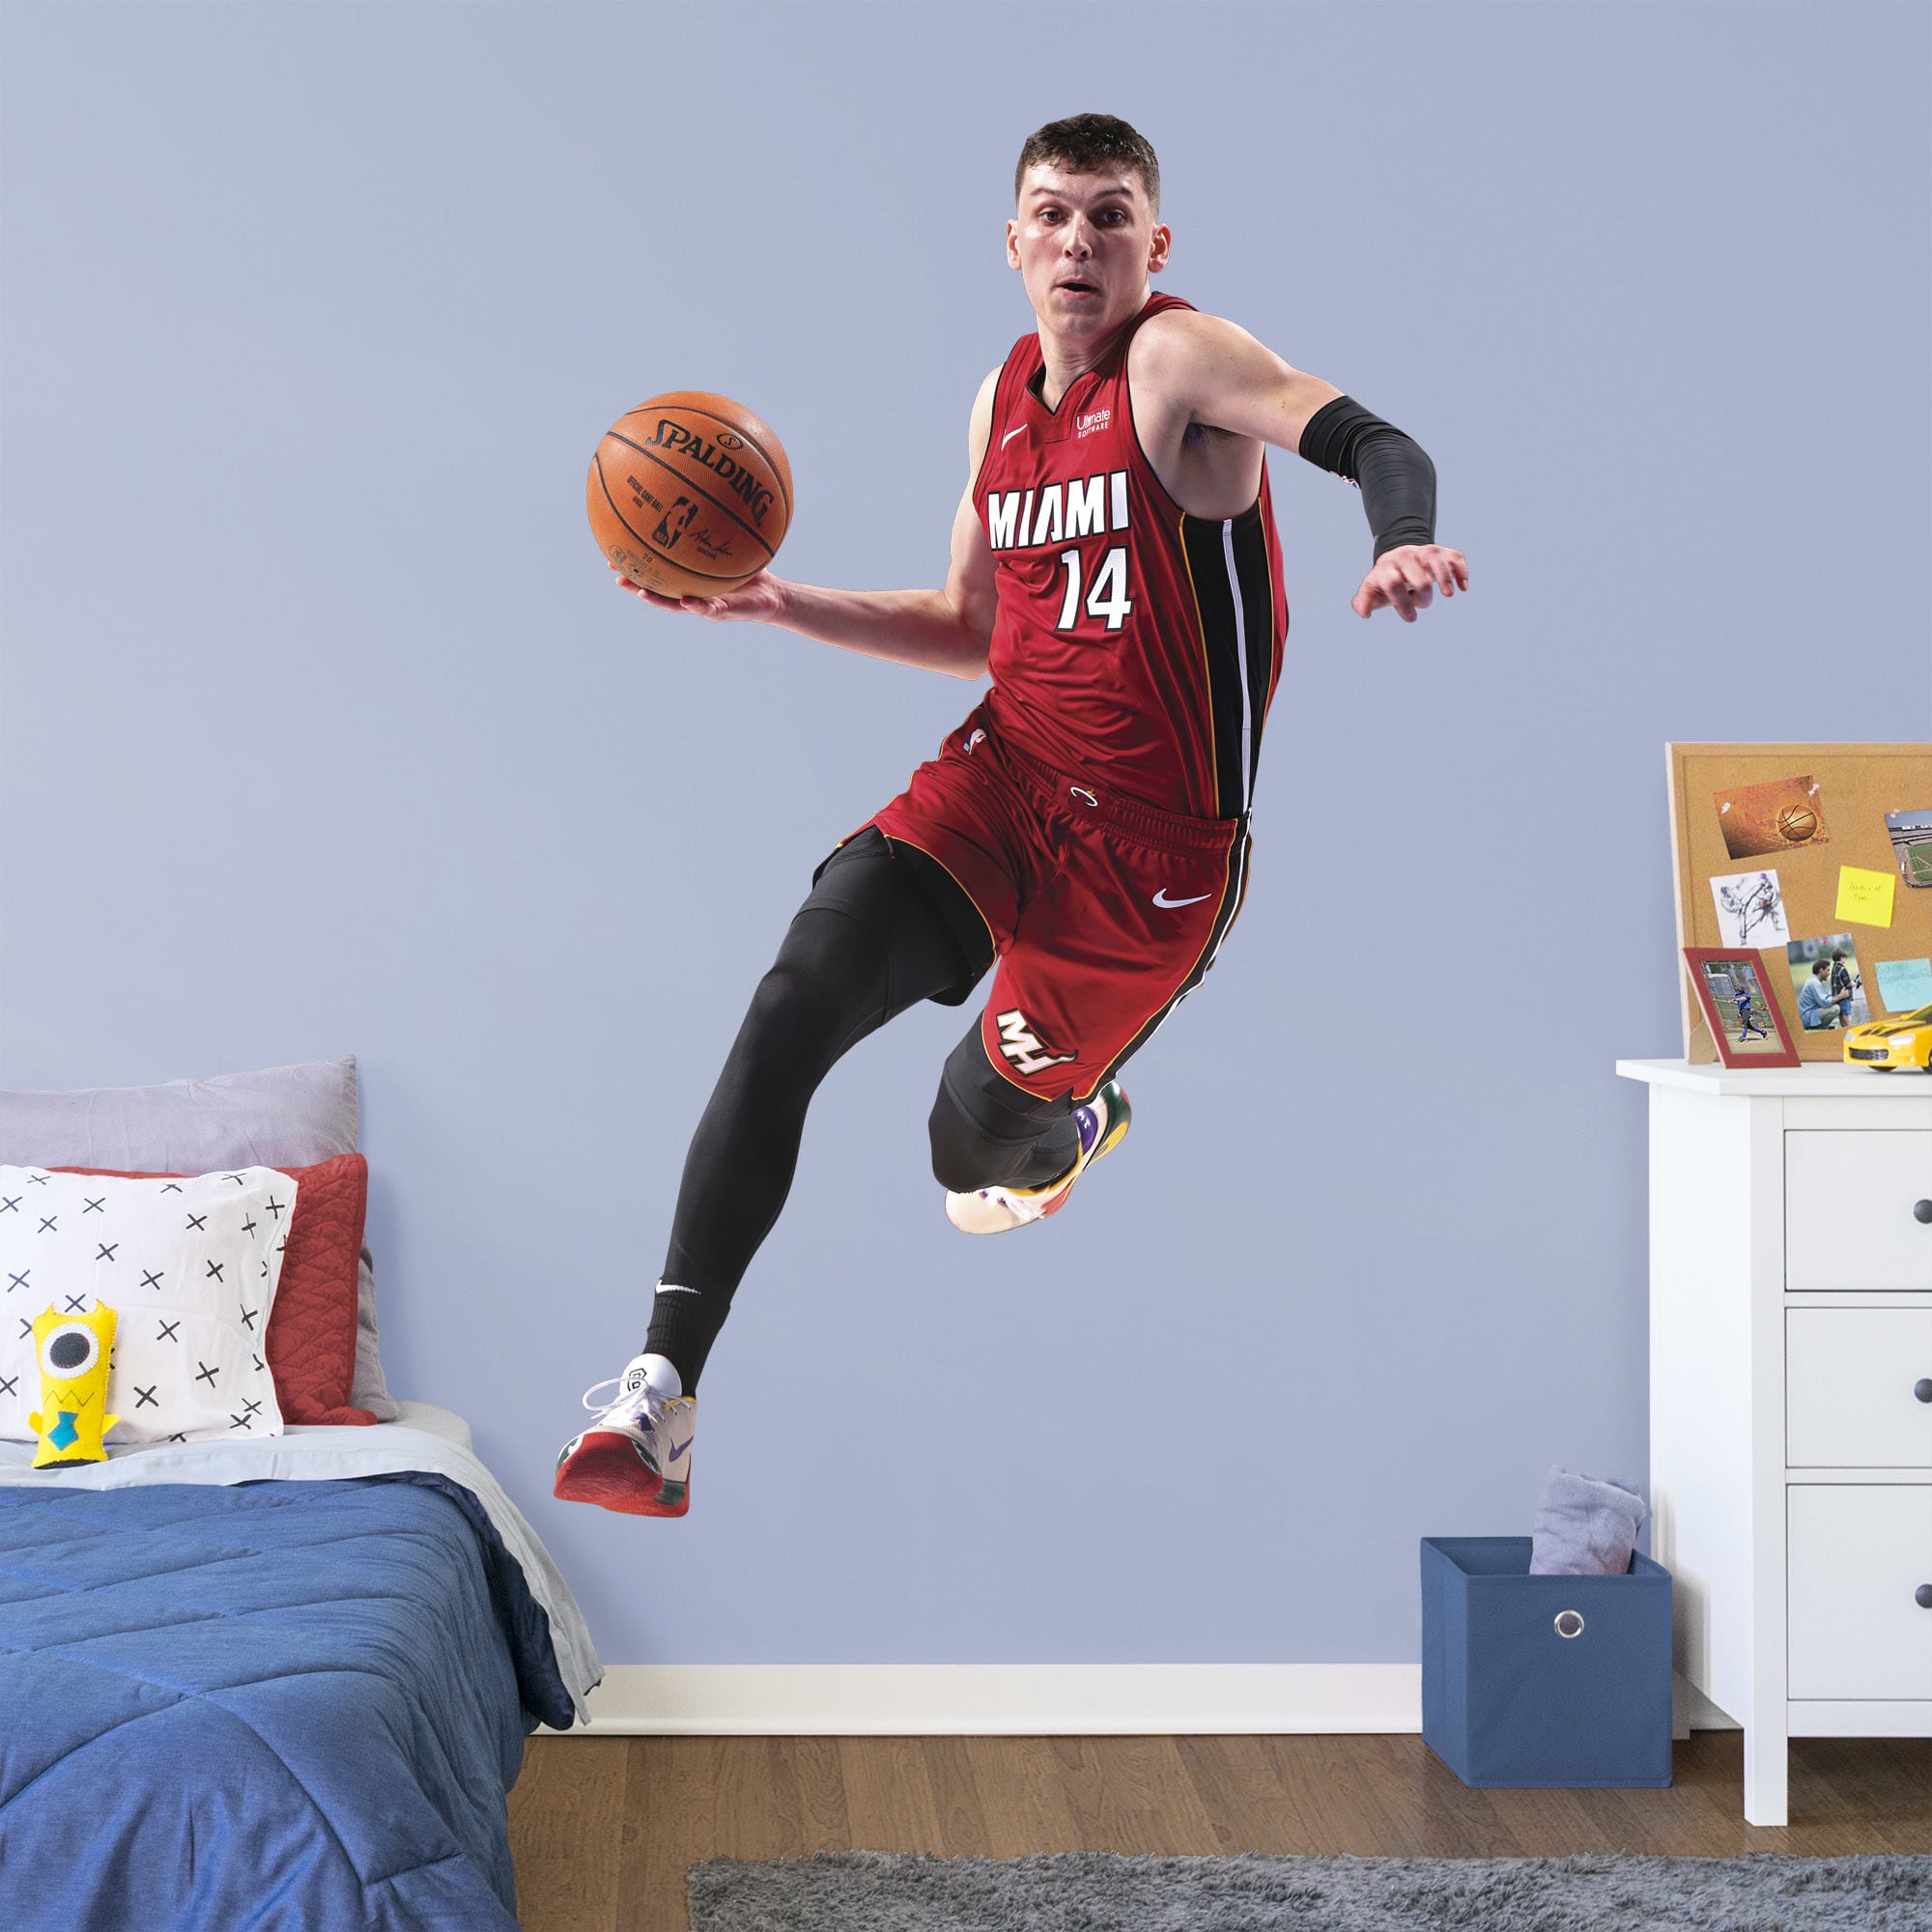 Tyler Herro for Miami Heat - Officially Licensed NBA Removable Wall Decal Life-Size Athlete + 2 Decals (51"W x 78"H) by Fathead